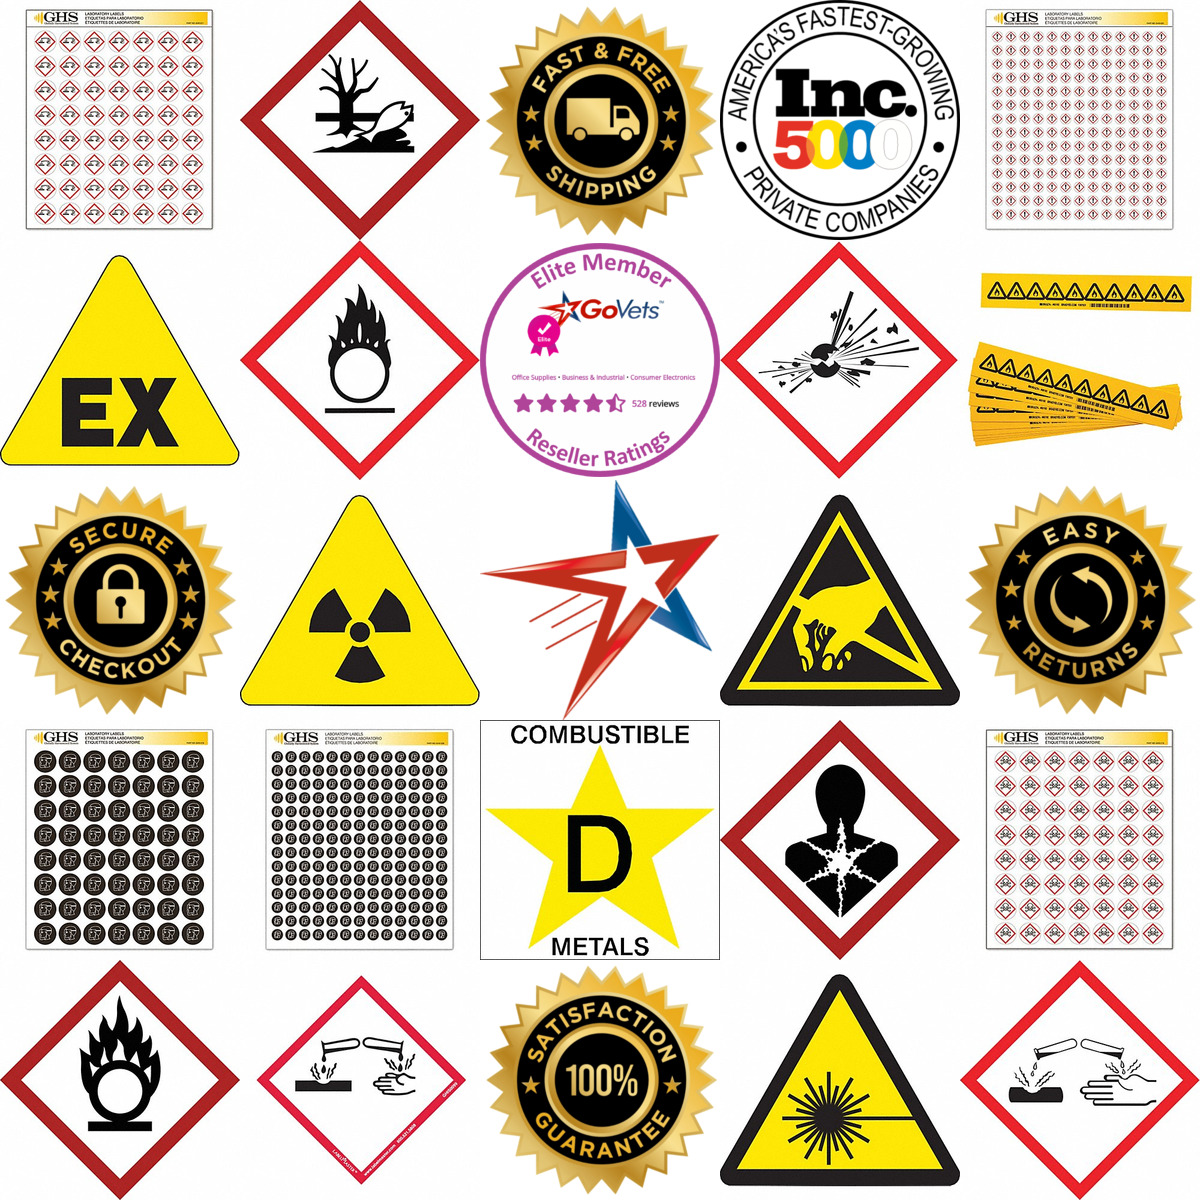 A selection of Ghs Labels products on GoVets